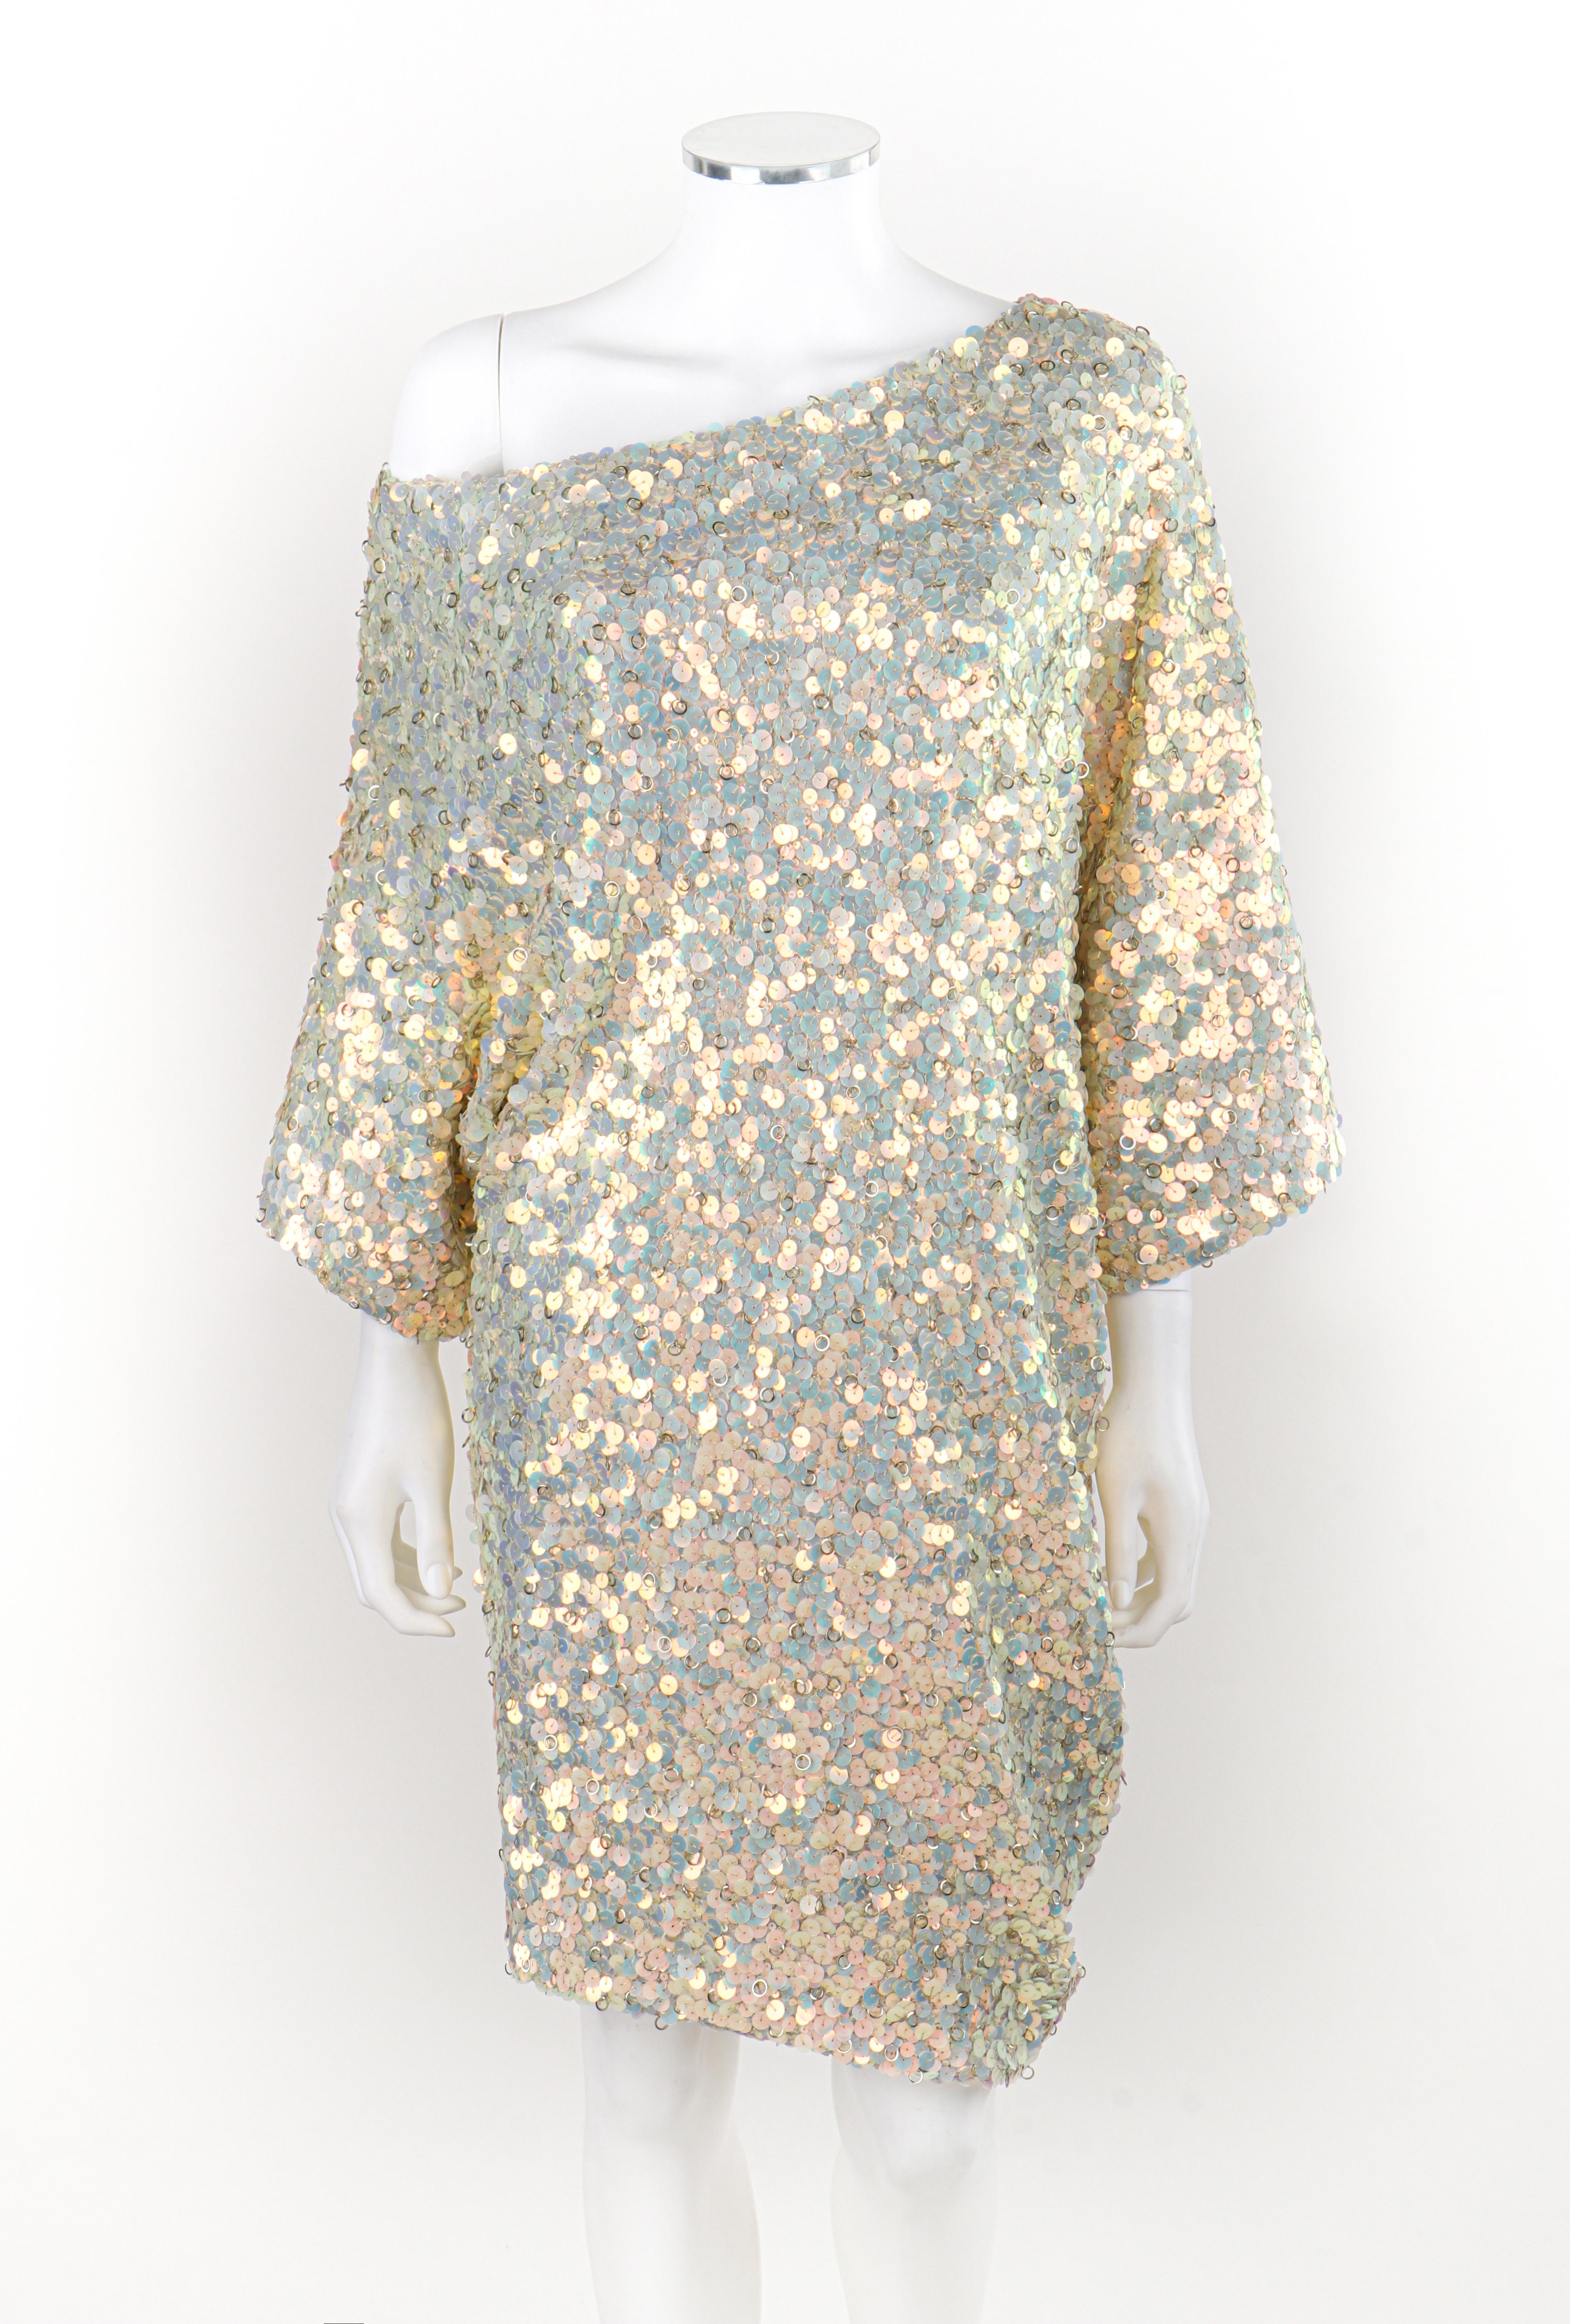 ALEXANDER McQUEEN c.2009 White Iridescent Pearl Sequin One Shoulder Mini Dress

Brand / Manufacturer: Alexander McQueen
Circa: 2009
Designer: Alexander McQueen
Style: Mini Dress
Color(s): Shades of white, iridescent shades, gold
Lined: Yes
Marked